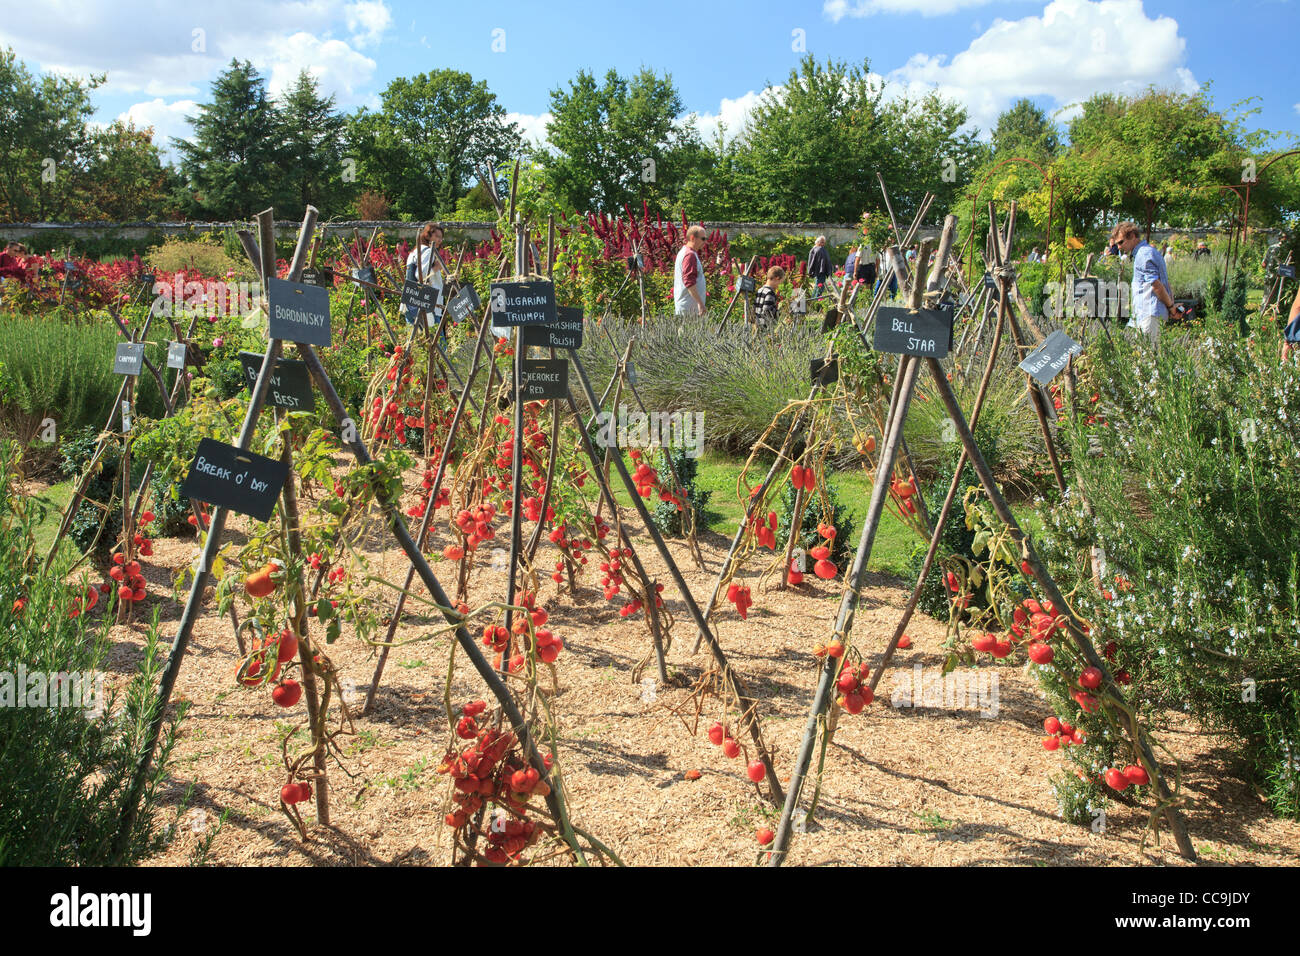 France, Indre-et-Loire, the château de la Bourdaisière, Conservatory of tomato, collection of tomatoes in the kitchen garden Stock Photo